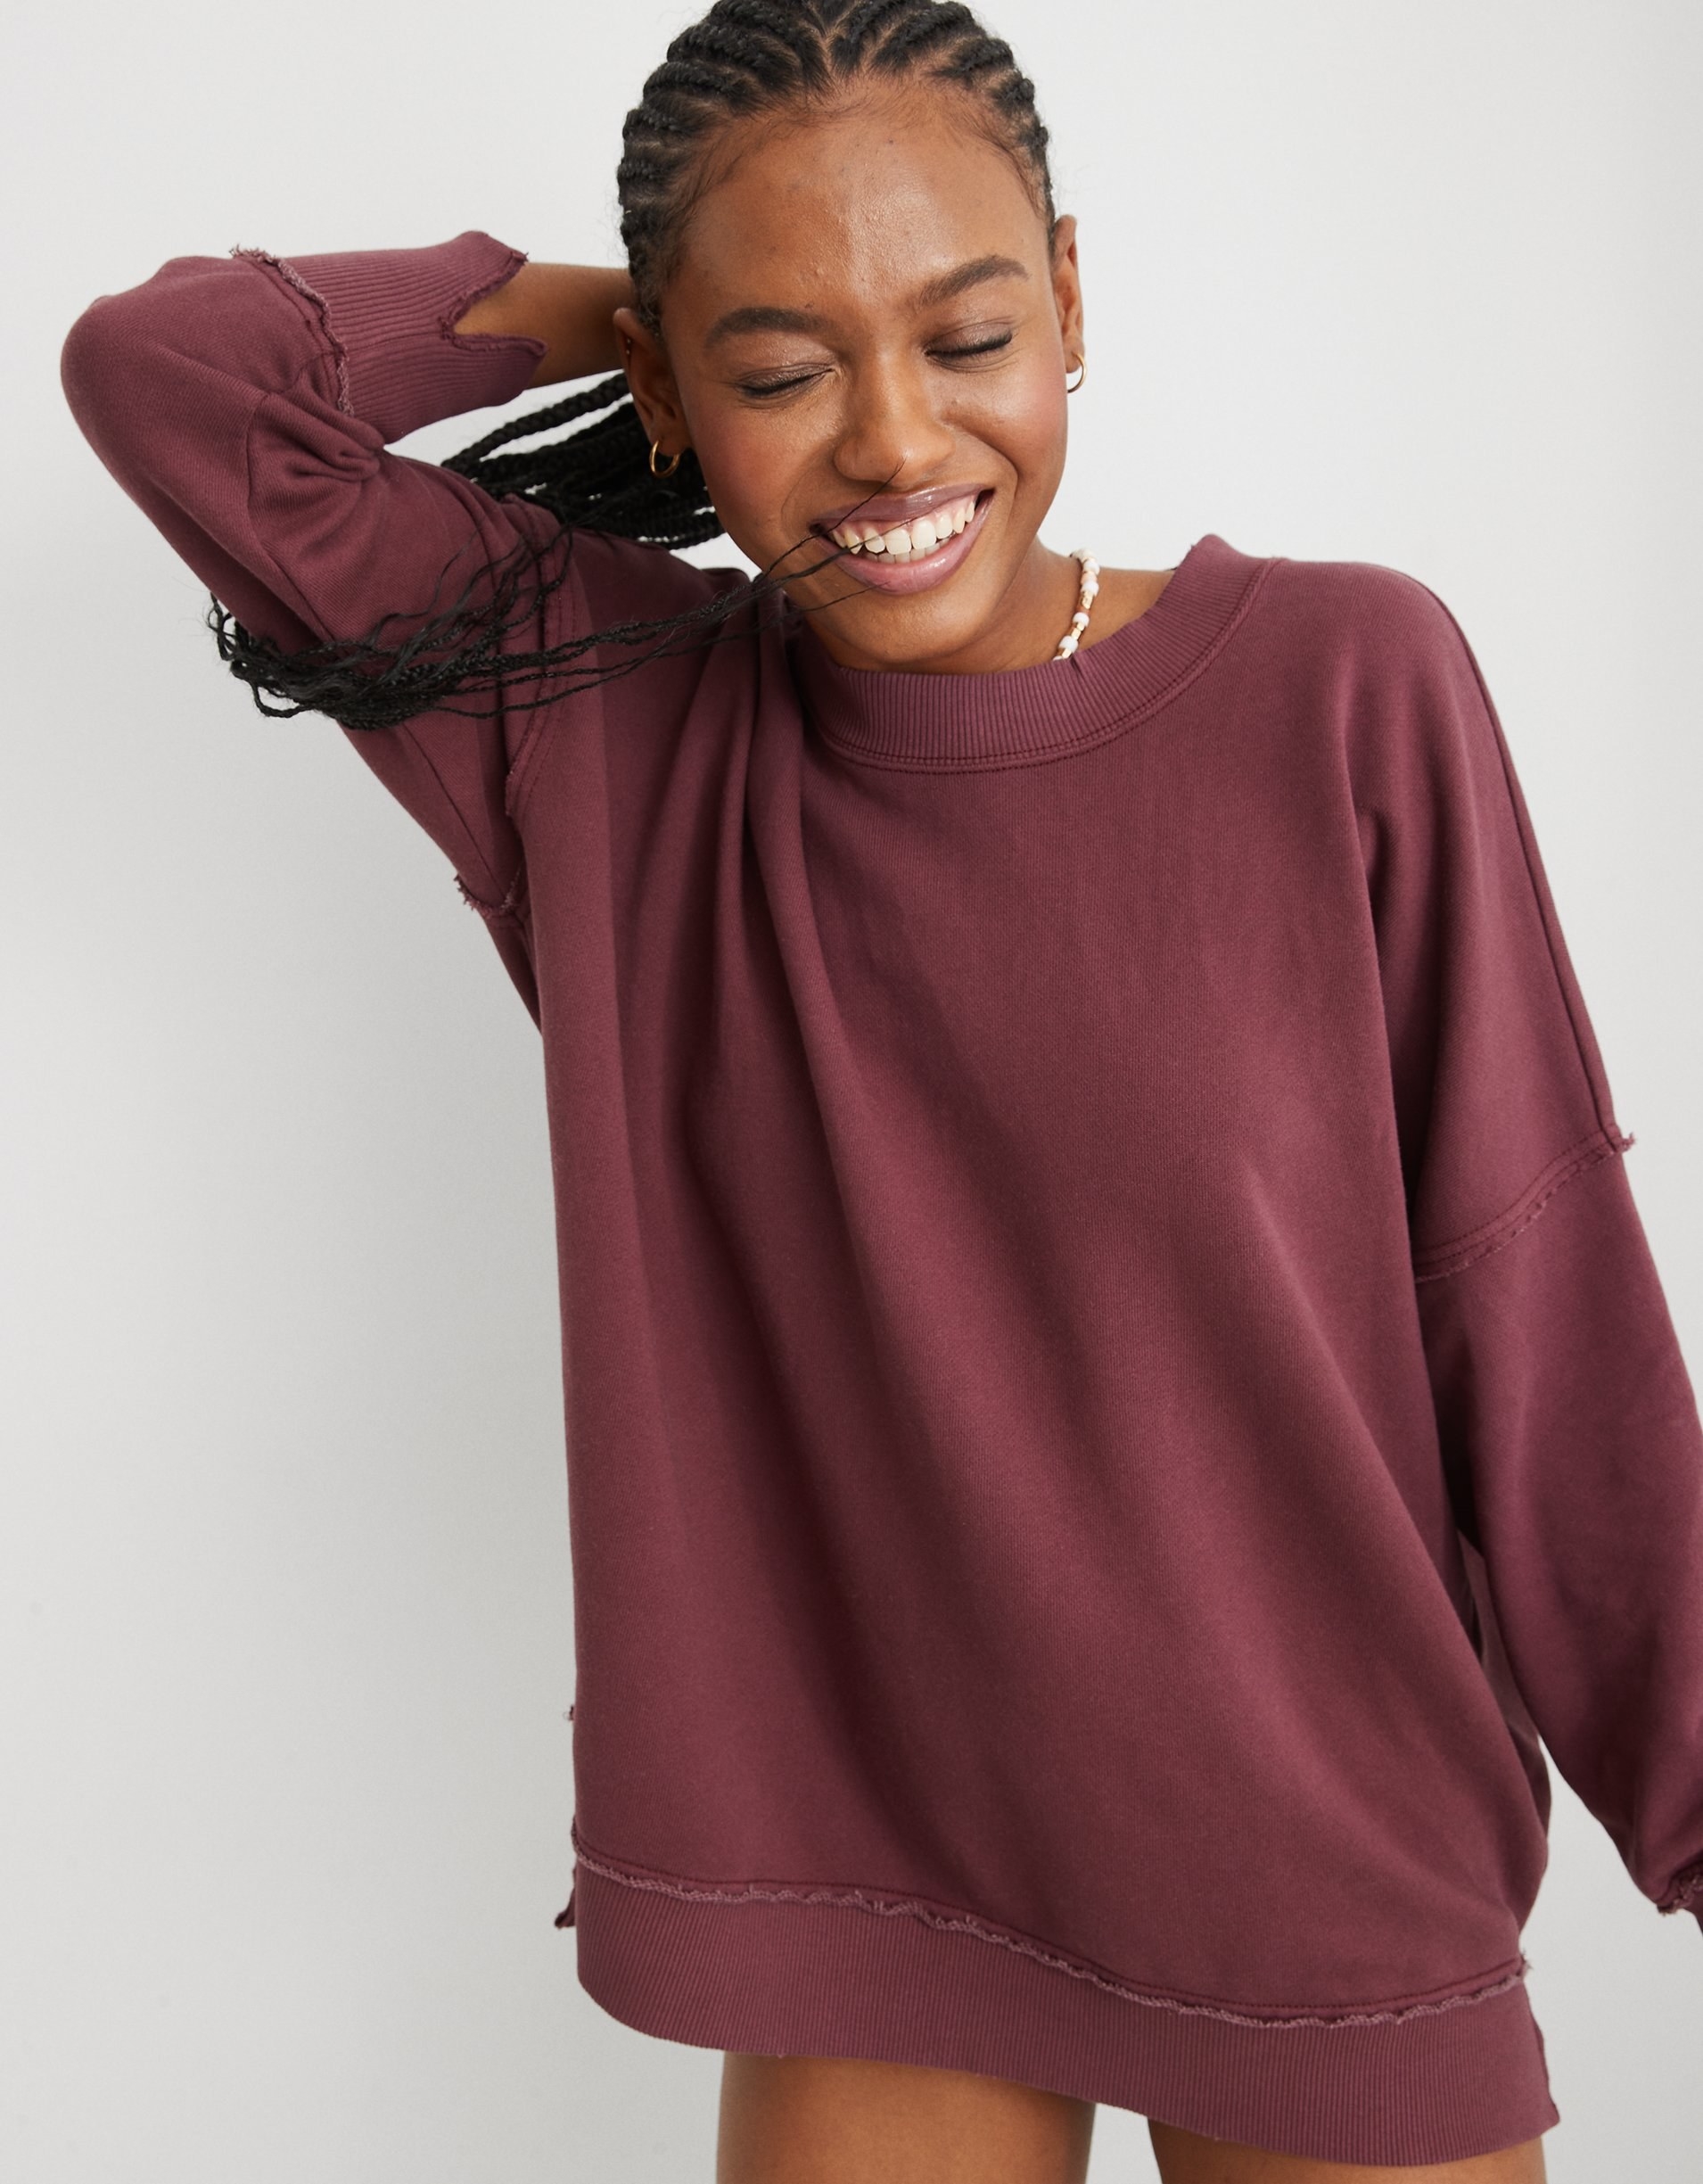 model in maroon oversized crewneck tee with distressed seams